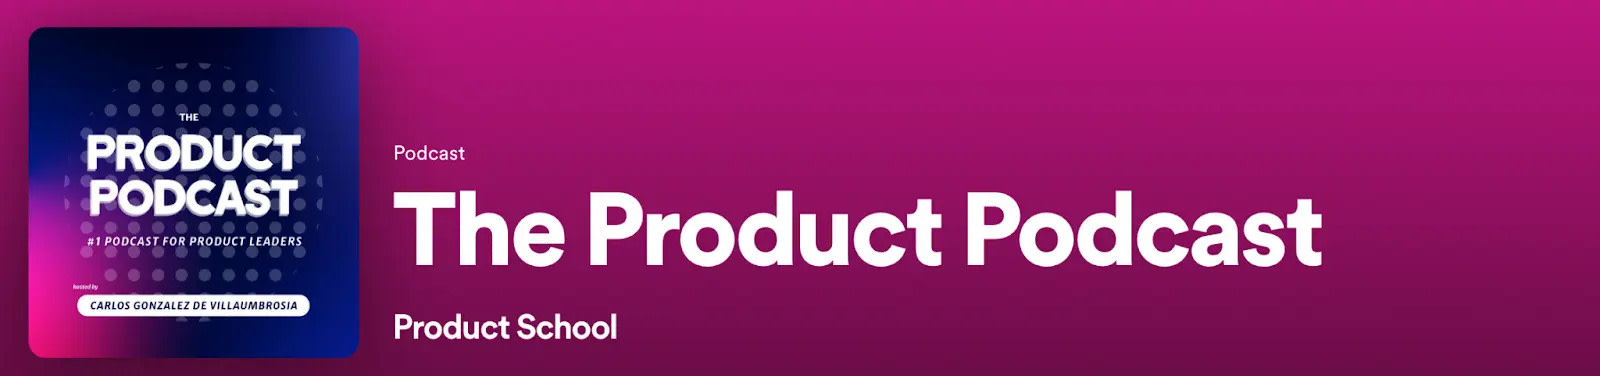 product podcast ss